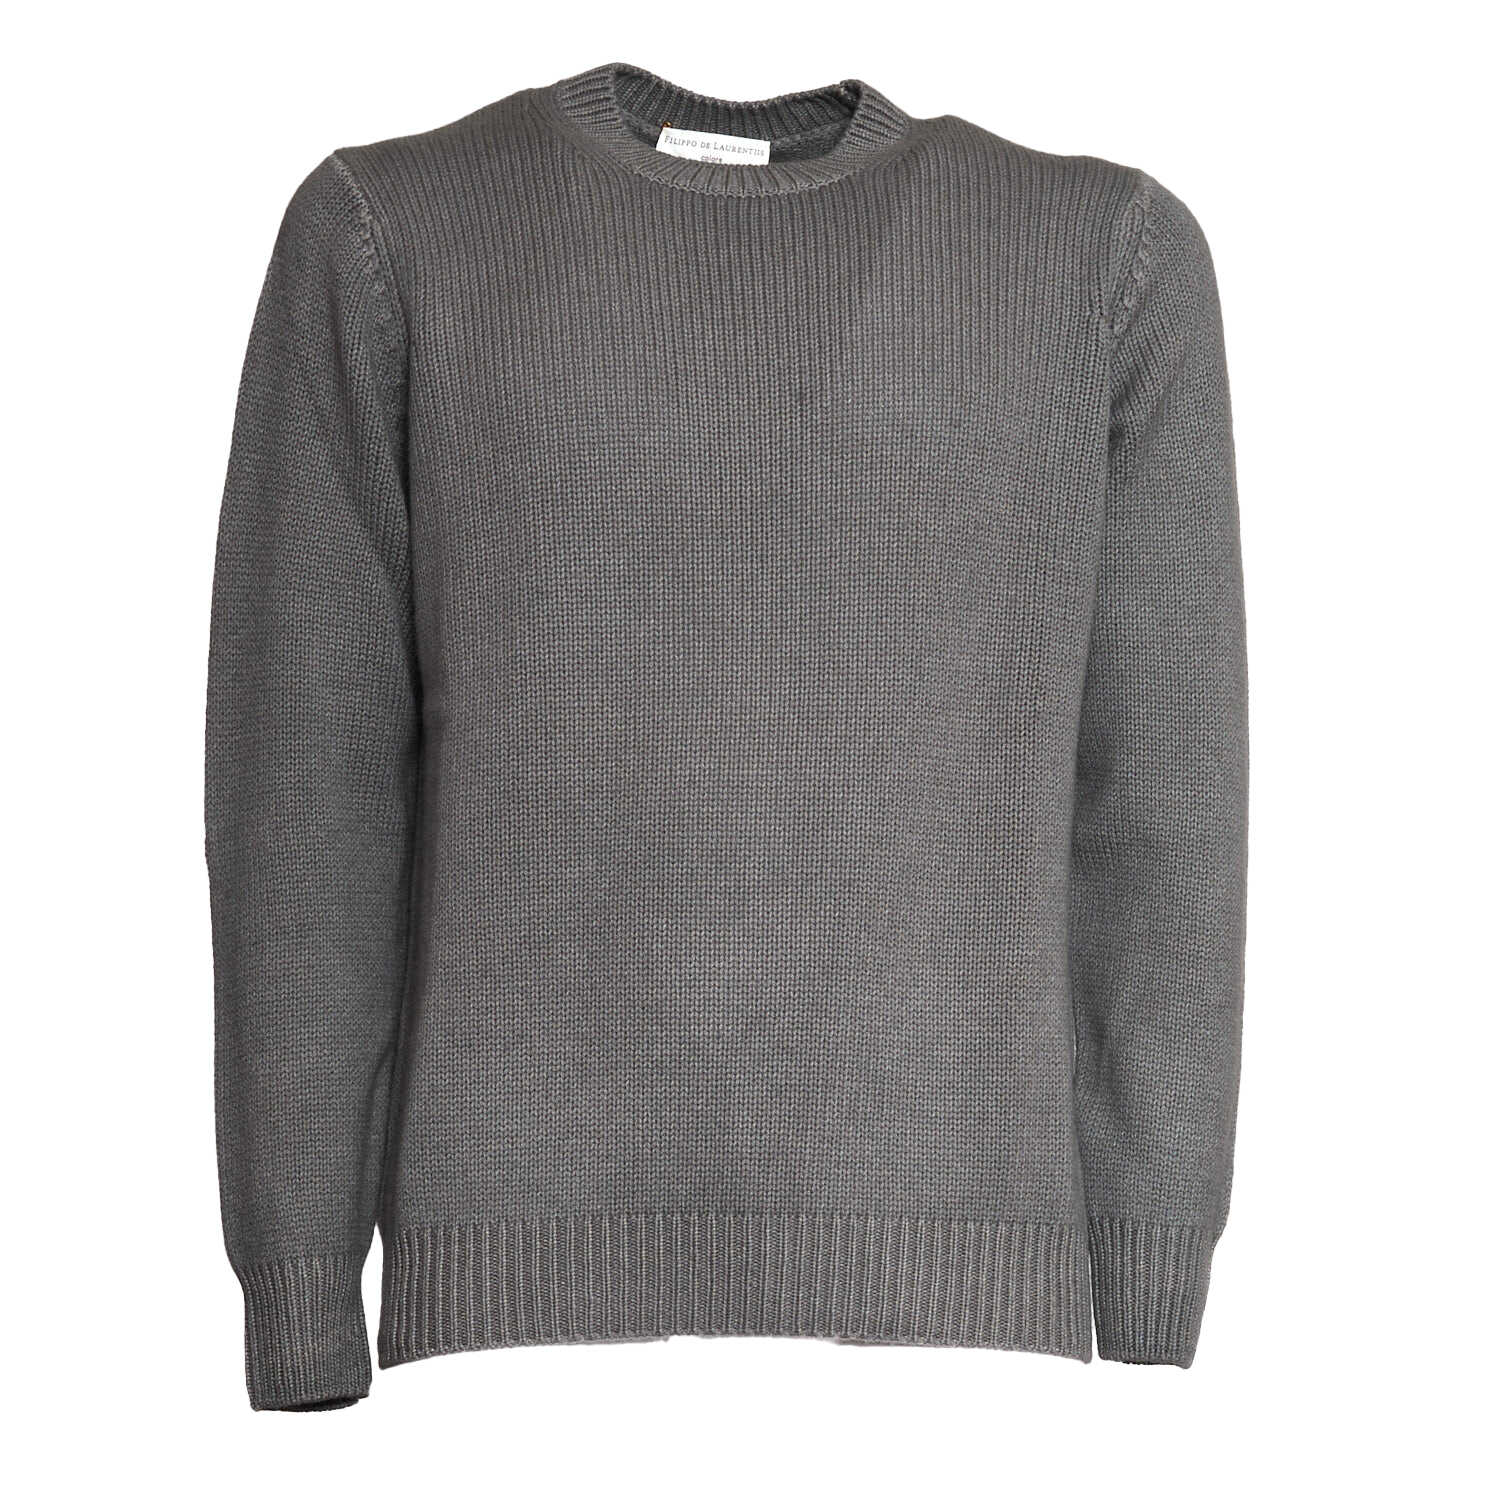 FILIPPO DE LAURENTIIS Round Neck Cloud Sweater In Wool, Silk And Cashmere N/A